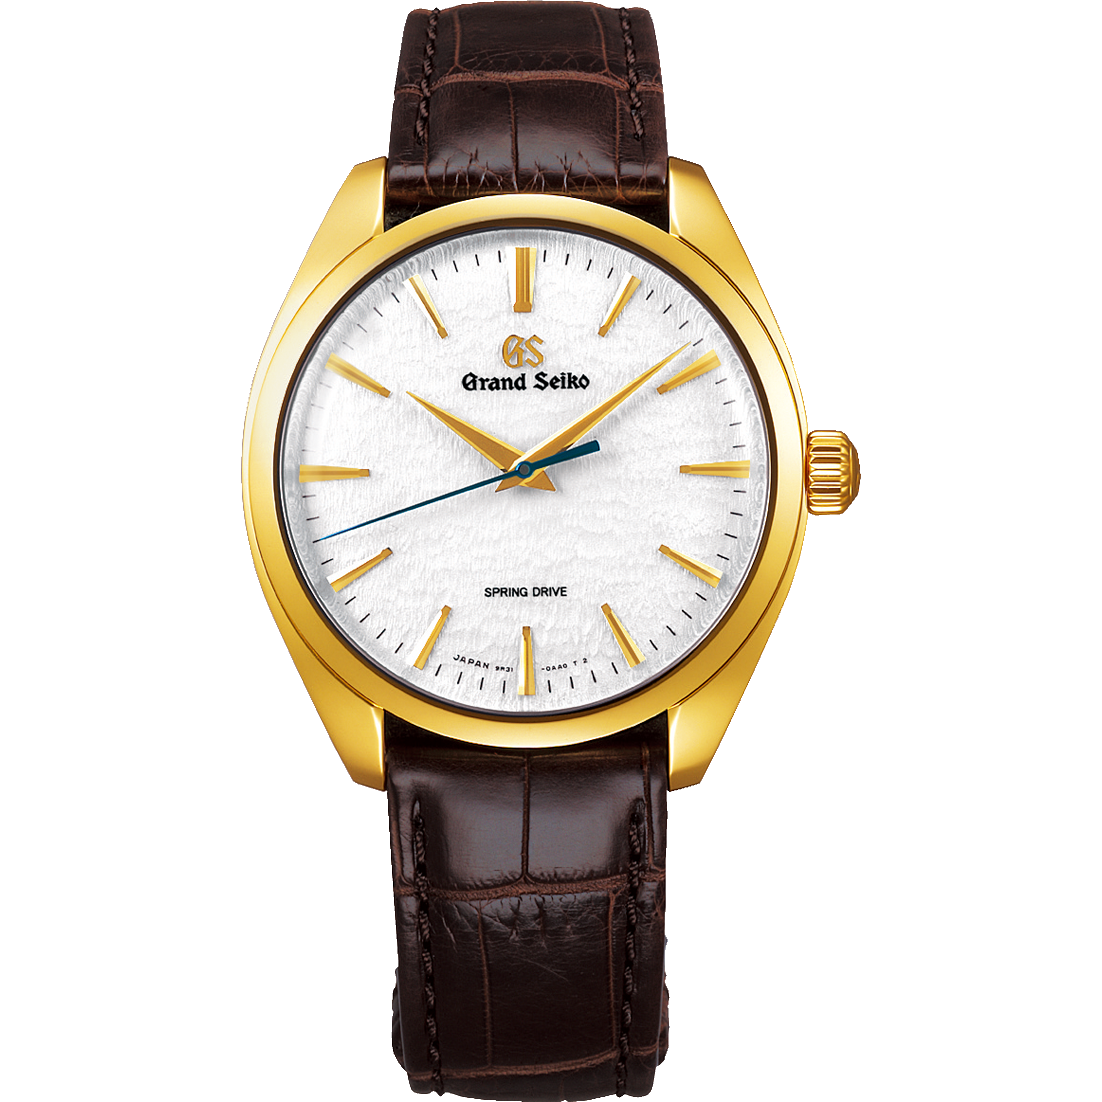 Grand Seiko Elegance Collection SBGY002 Spring Drive Watch From Japan - IPPO JAPAN WATCH 